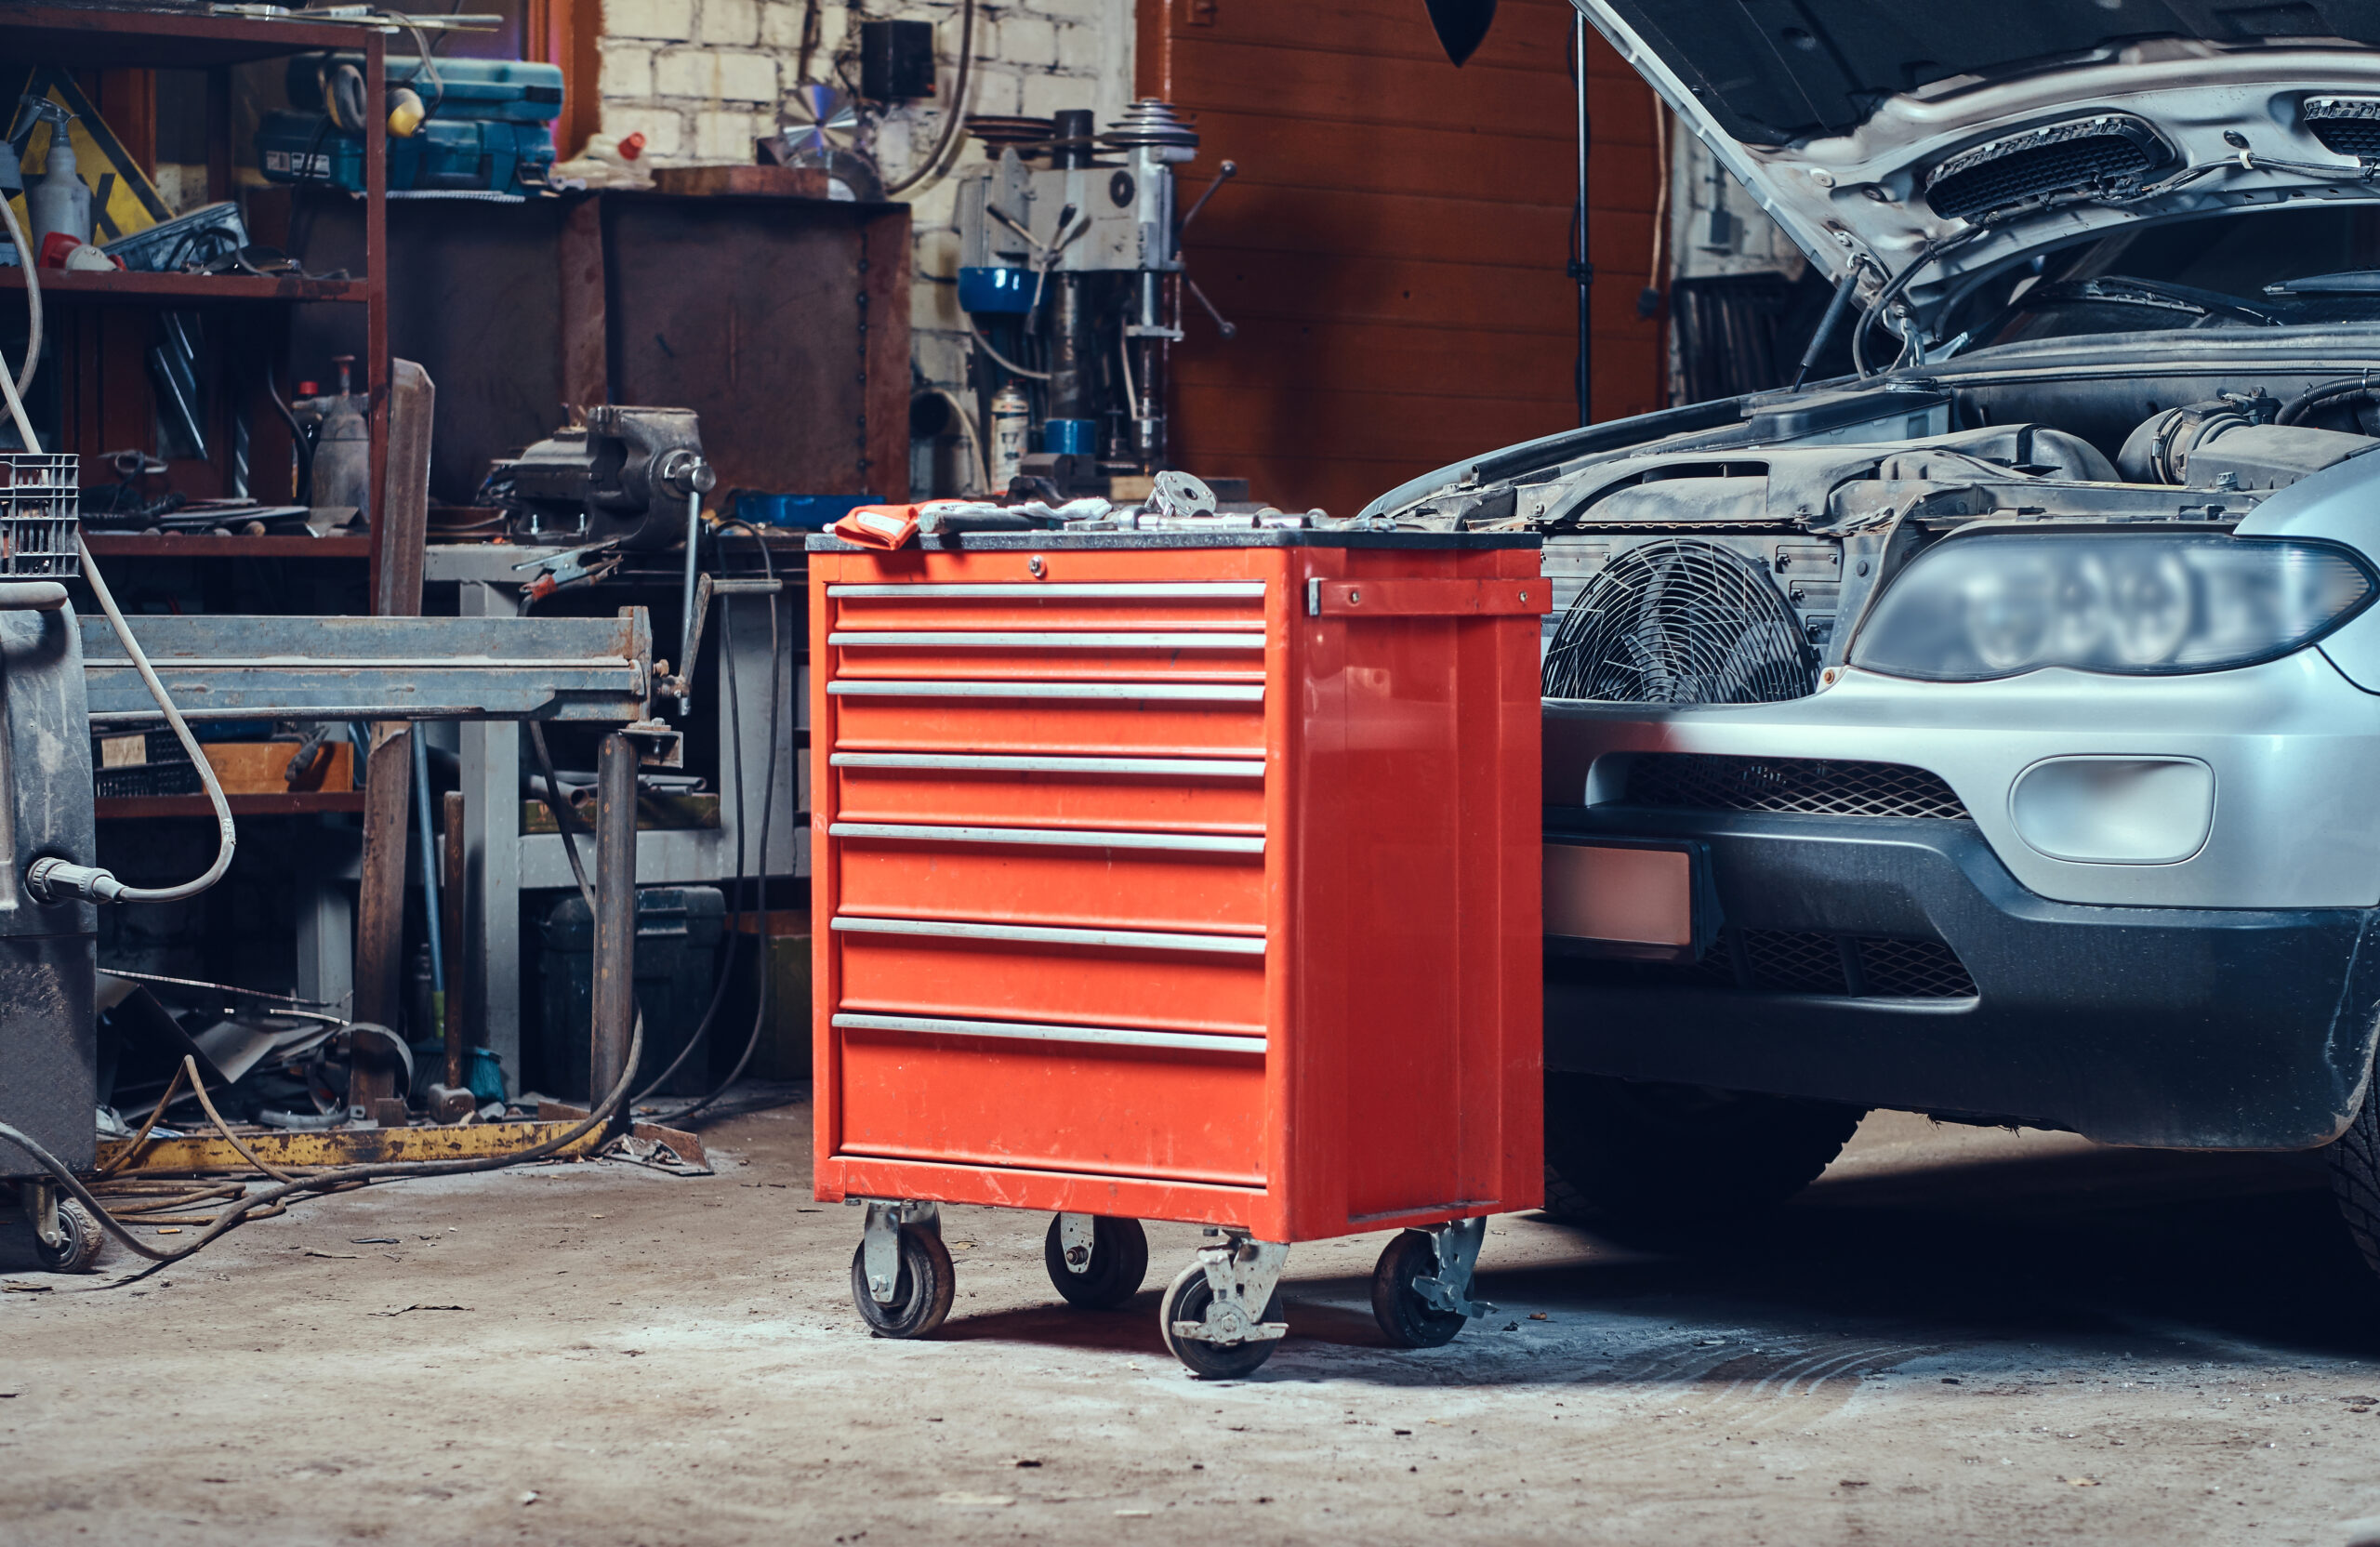 Red steel tool box in a garage.